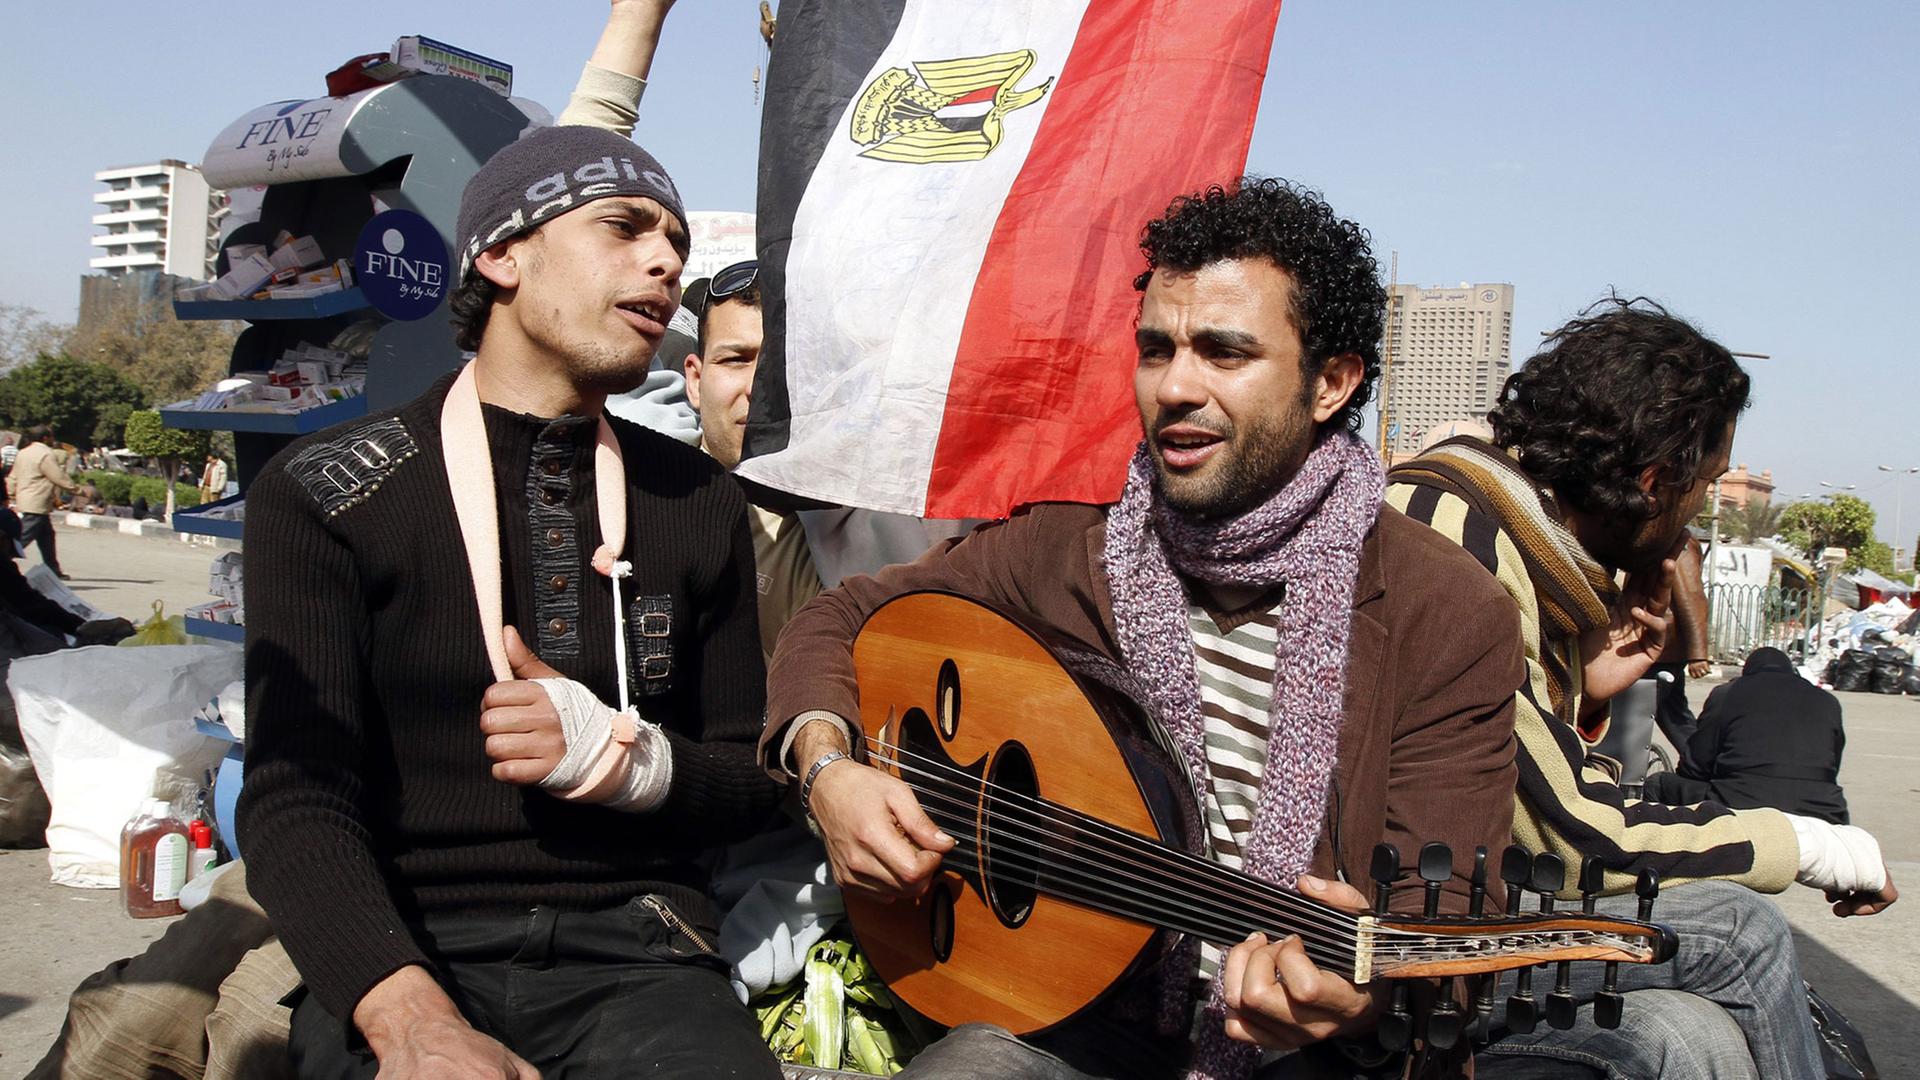 Egyptian demonstrators sing anti-Mubarak songs at Cairo's Tahrir square on February 6, 2011 on the 13th day of protests calling for the ouster of President Hosni Mubarak.